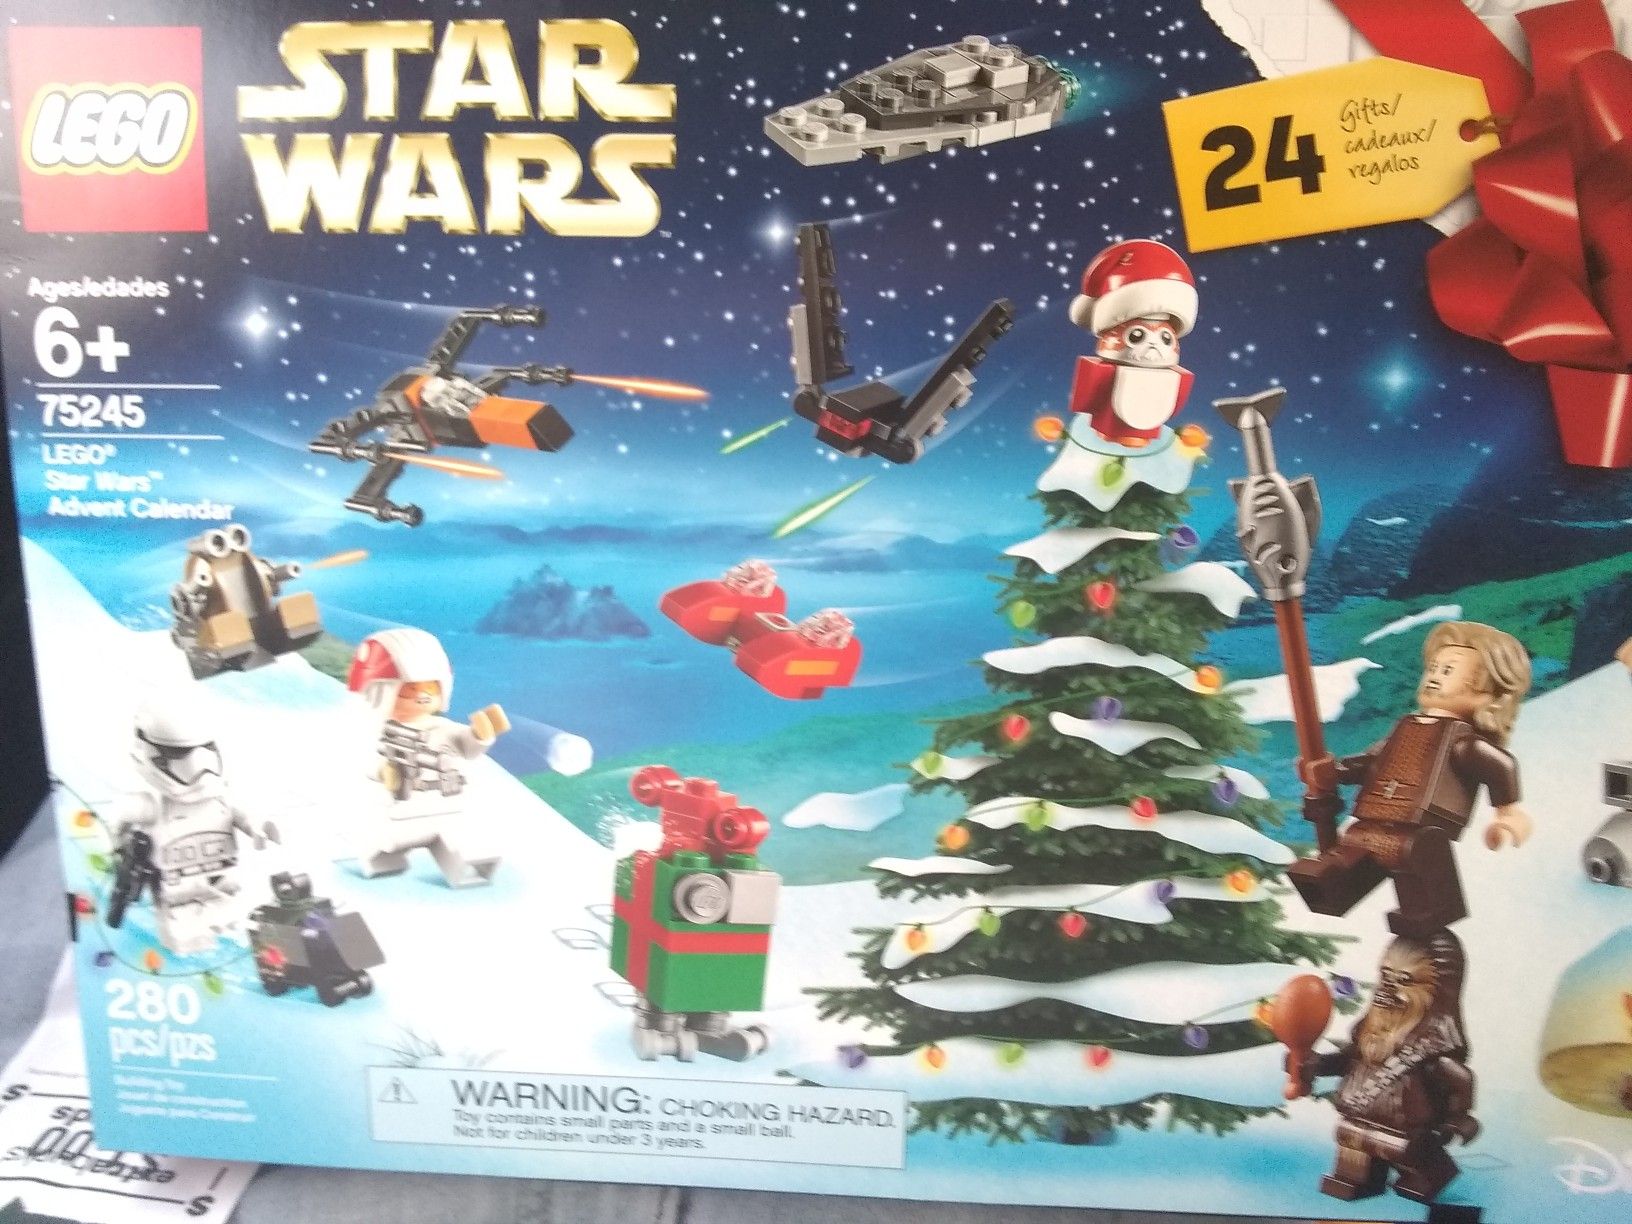 Legos Star Wars 2019 ADVENT Calendar For Sale! Only #23! I ship anywhere!